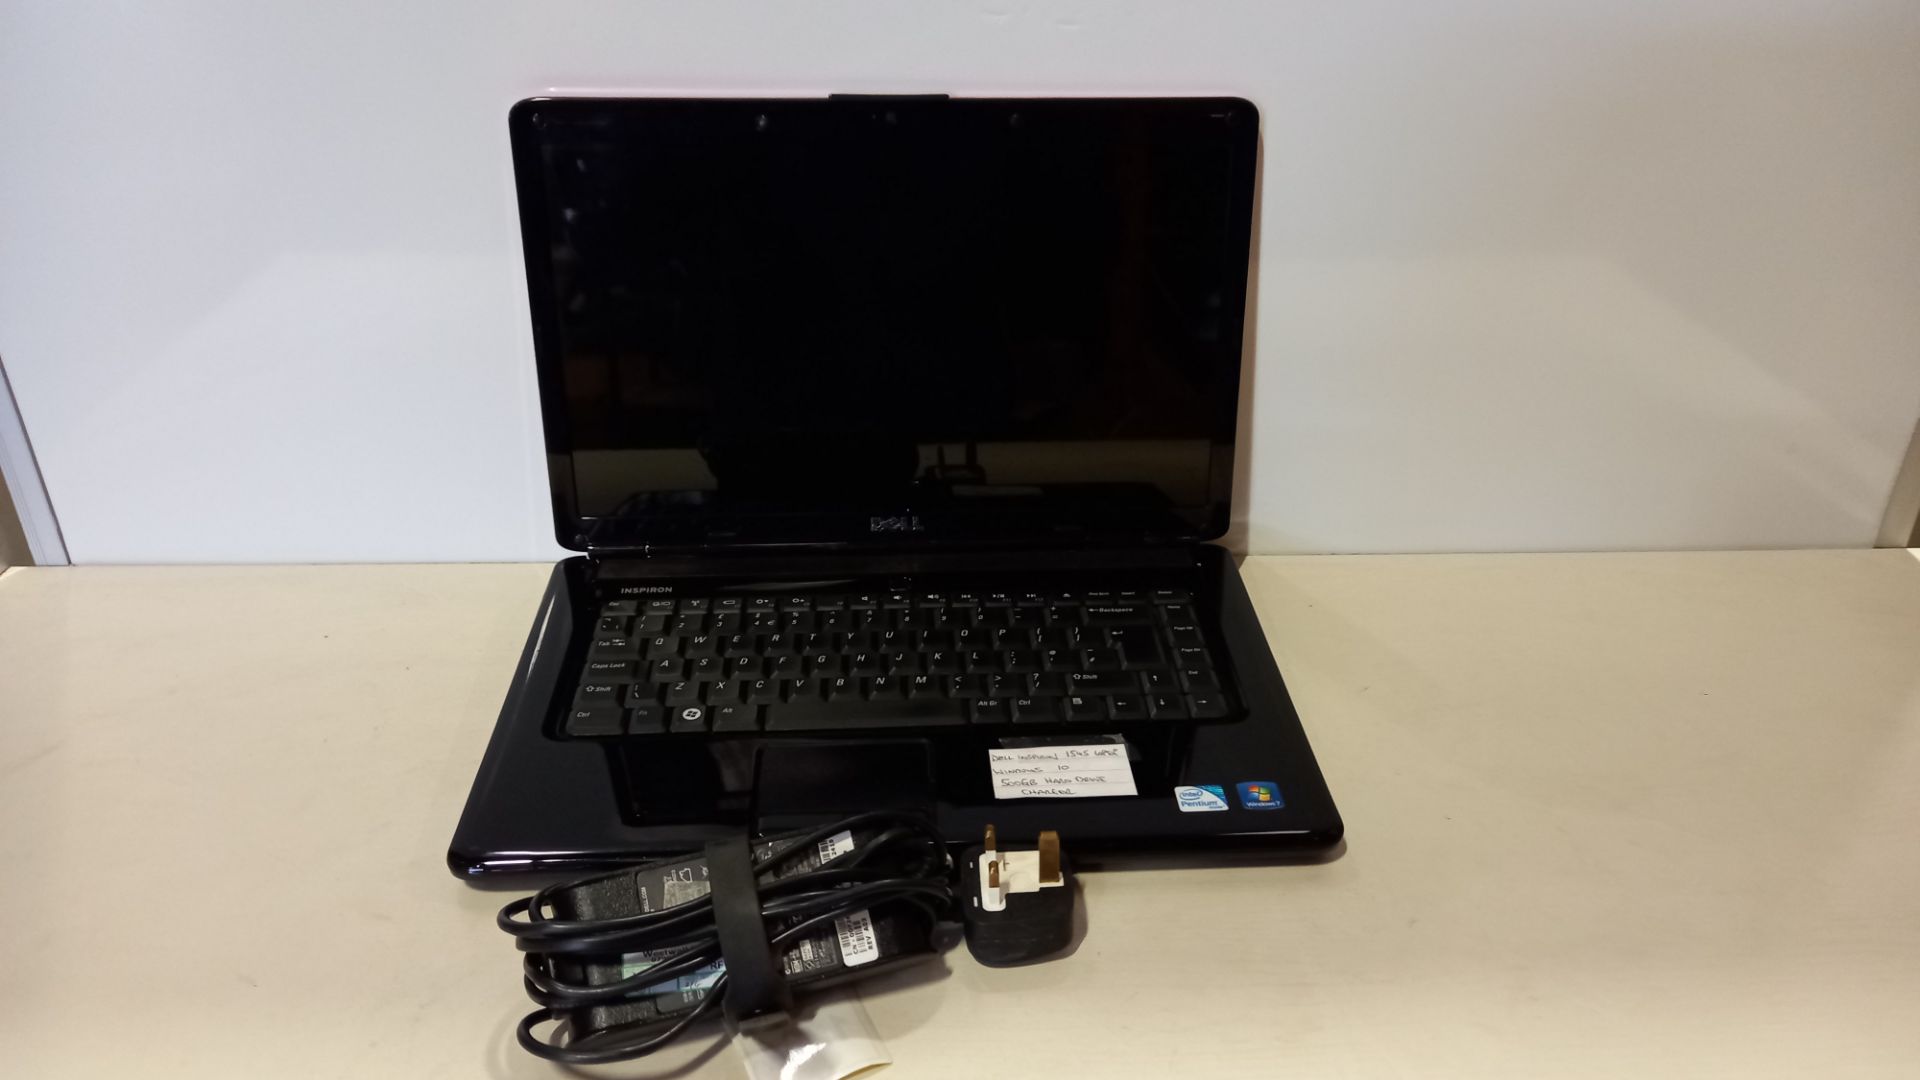 DELL INSPIRON 1545 LAPTOP WINDOWS 10 500GB HARDDRIVE - WITH CHARGER